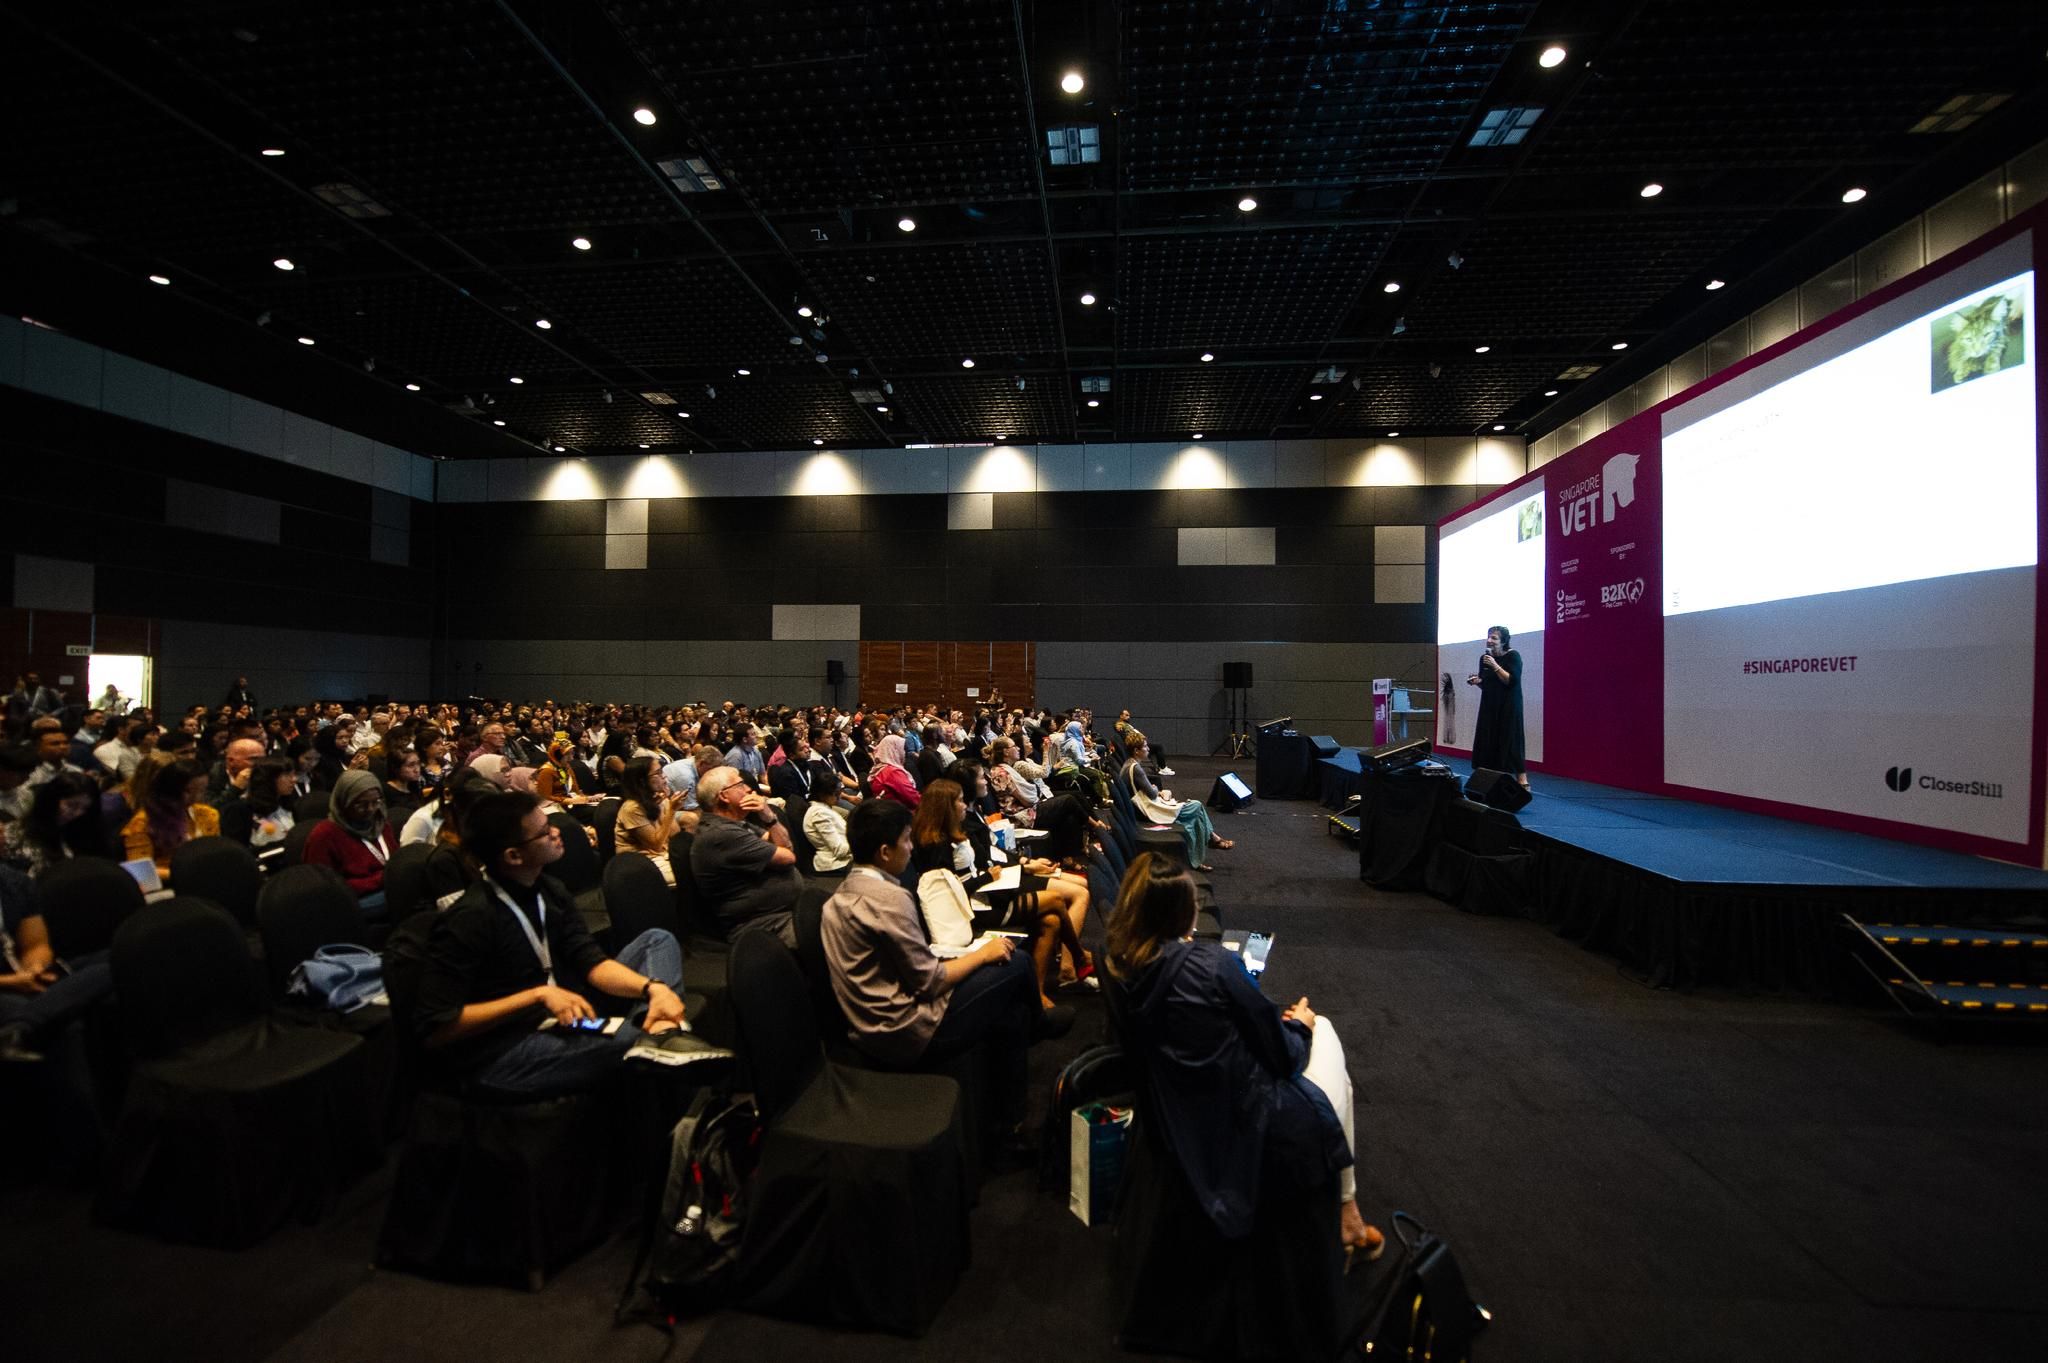 Singapore Vet 2019 welcomed 1,133 attendees from more than 42 countries